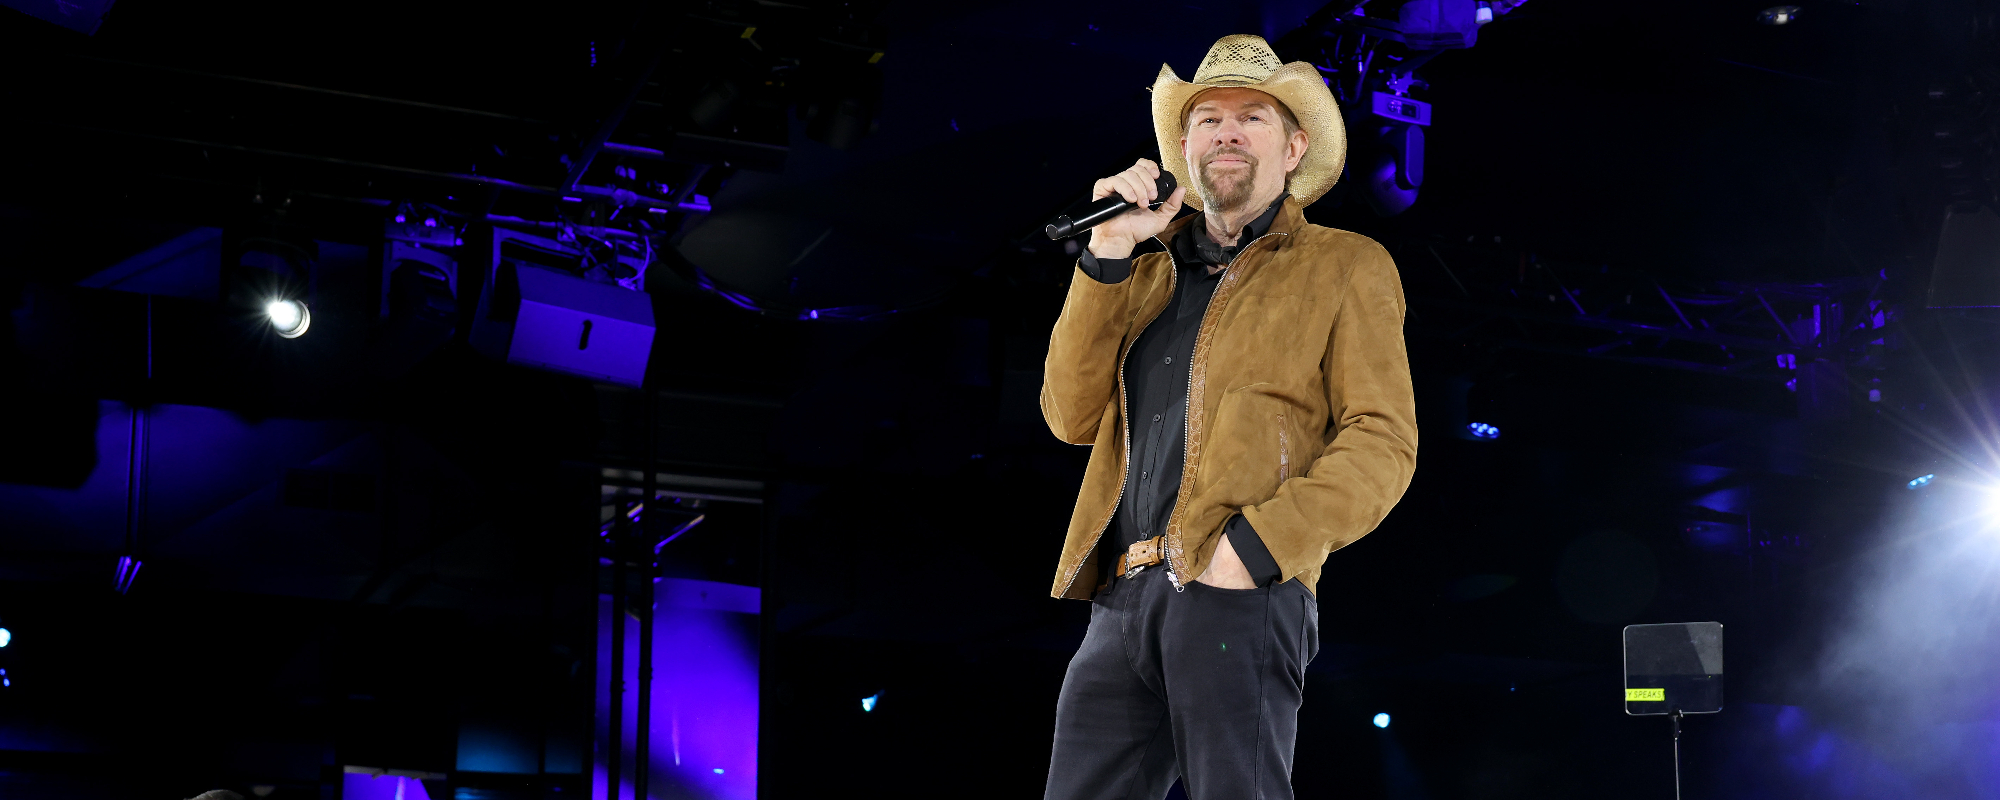 Toby Keith Not Letting Cancer Battle “Define” the Rest of His Life